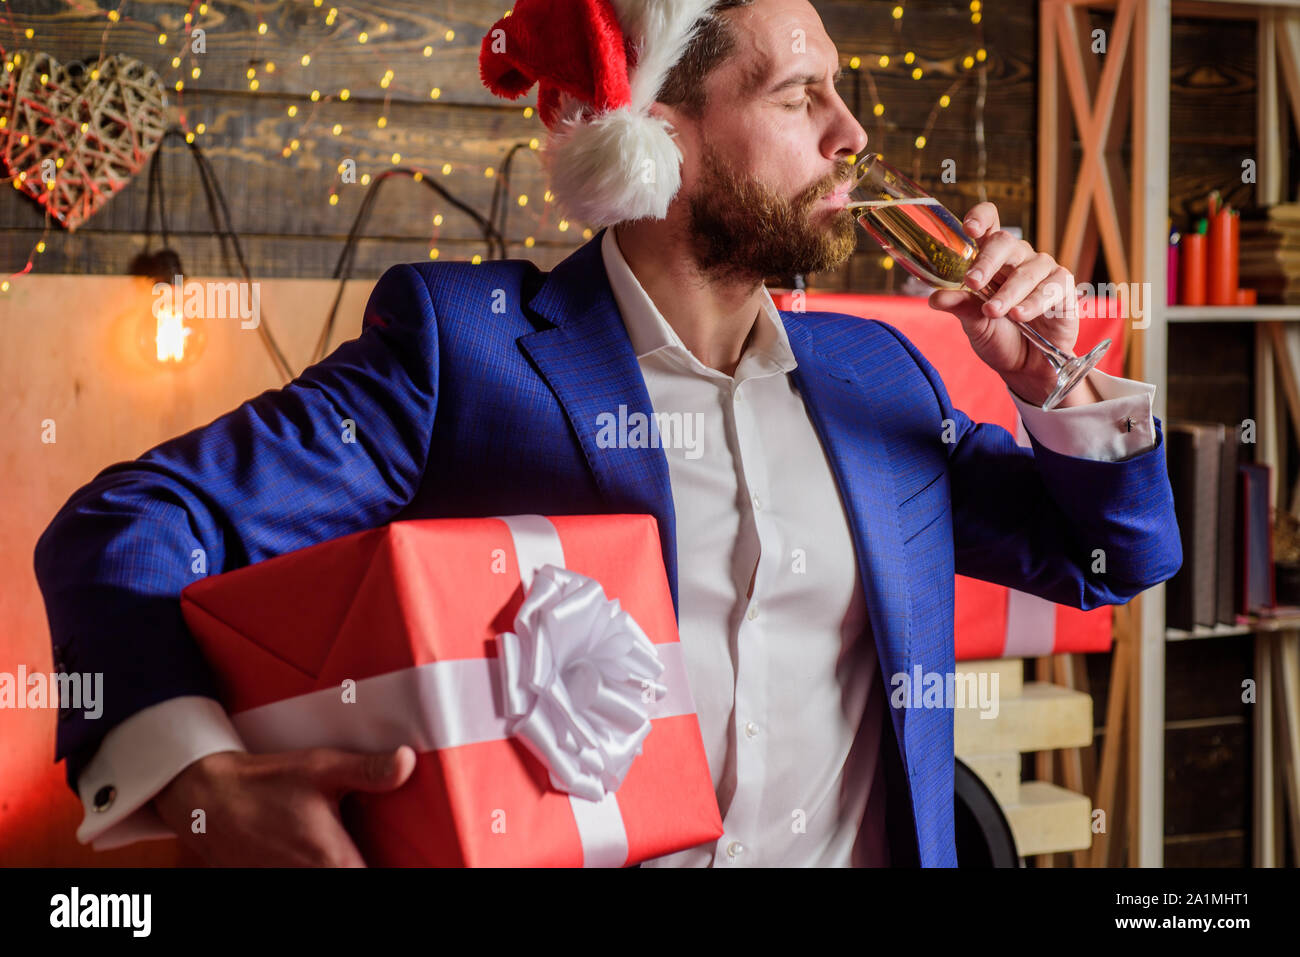 https://c8.alamy.com/comp/2A1MHT1/secret-santa-office-tradition-man-formal-suit-hold-gift-box-christmas-gift-from-colleague-tradition-giving-gifts-celebrate-christmas-corporate-party-businessman-excited-face-hold-gift-box-2A1MHT1.jpg